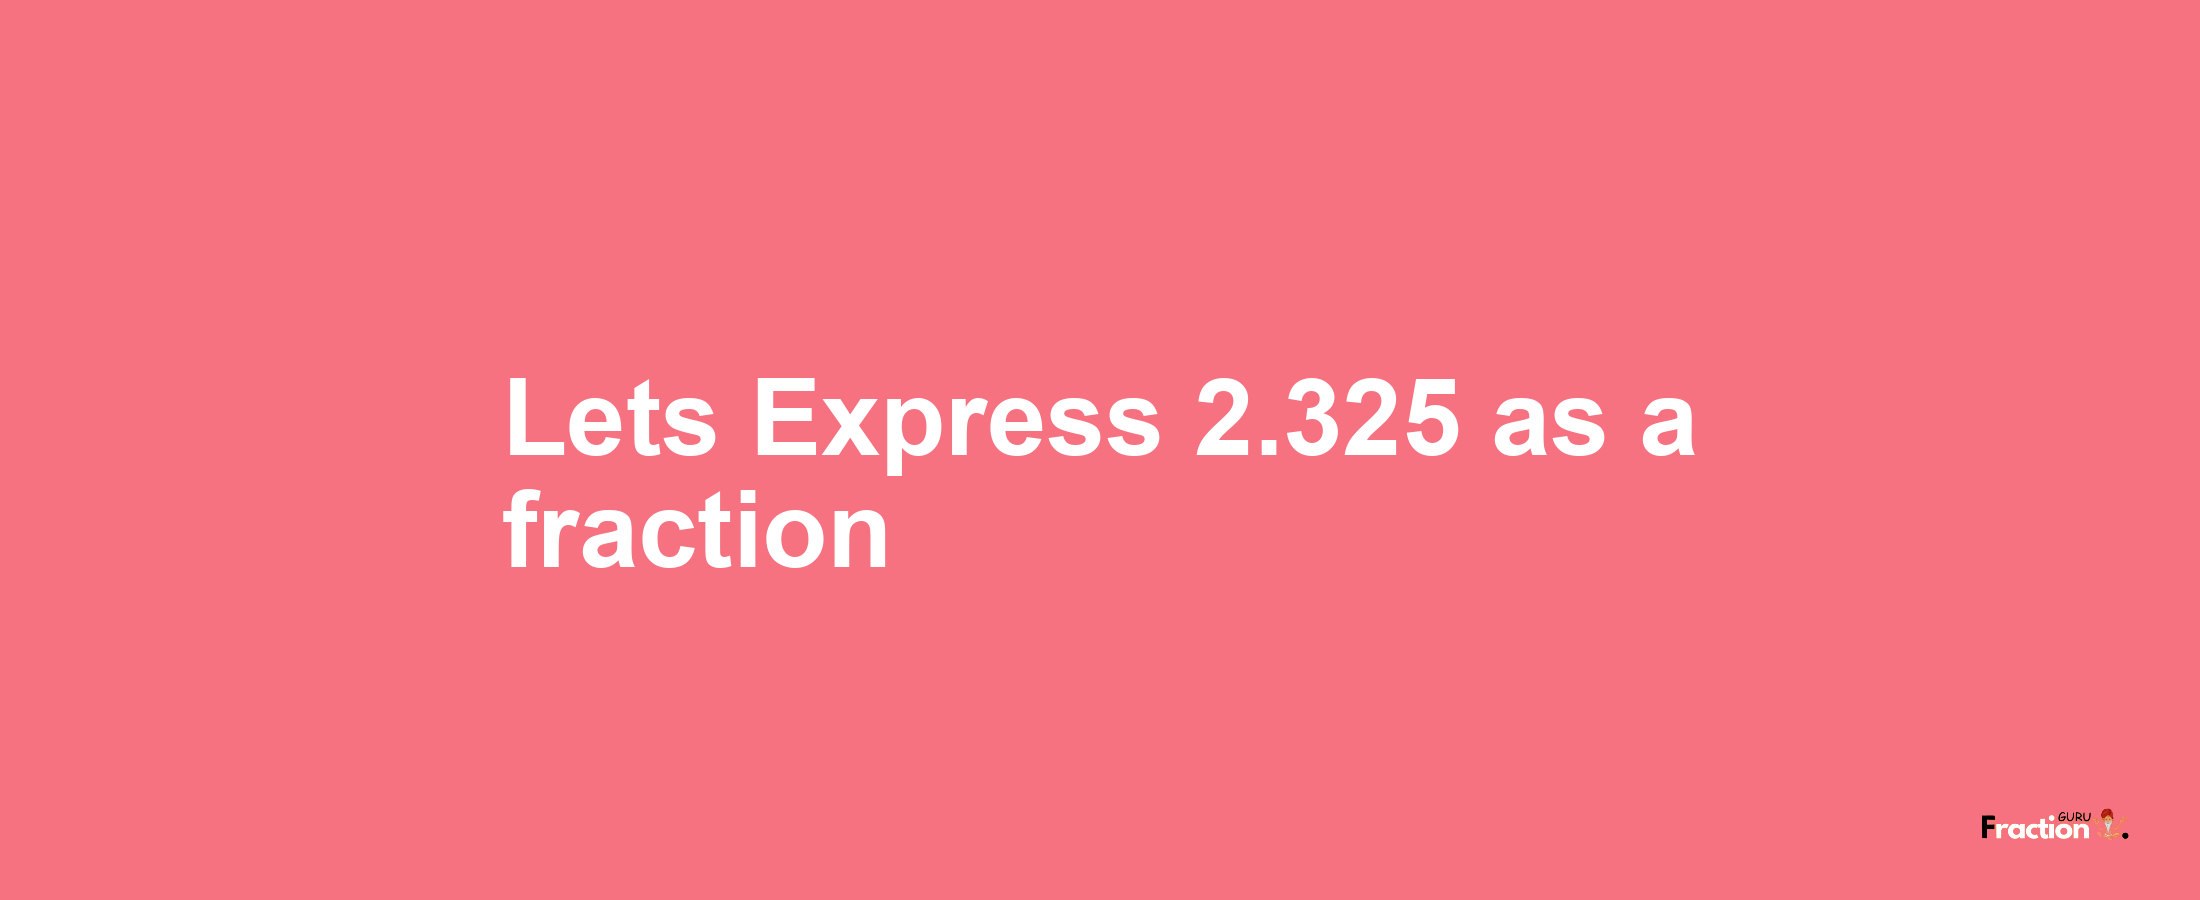 Lets Express 2.325 as afraction